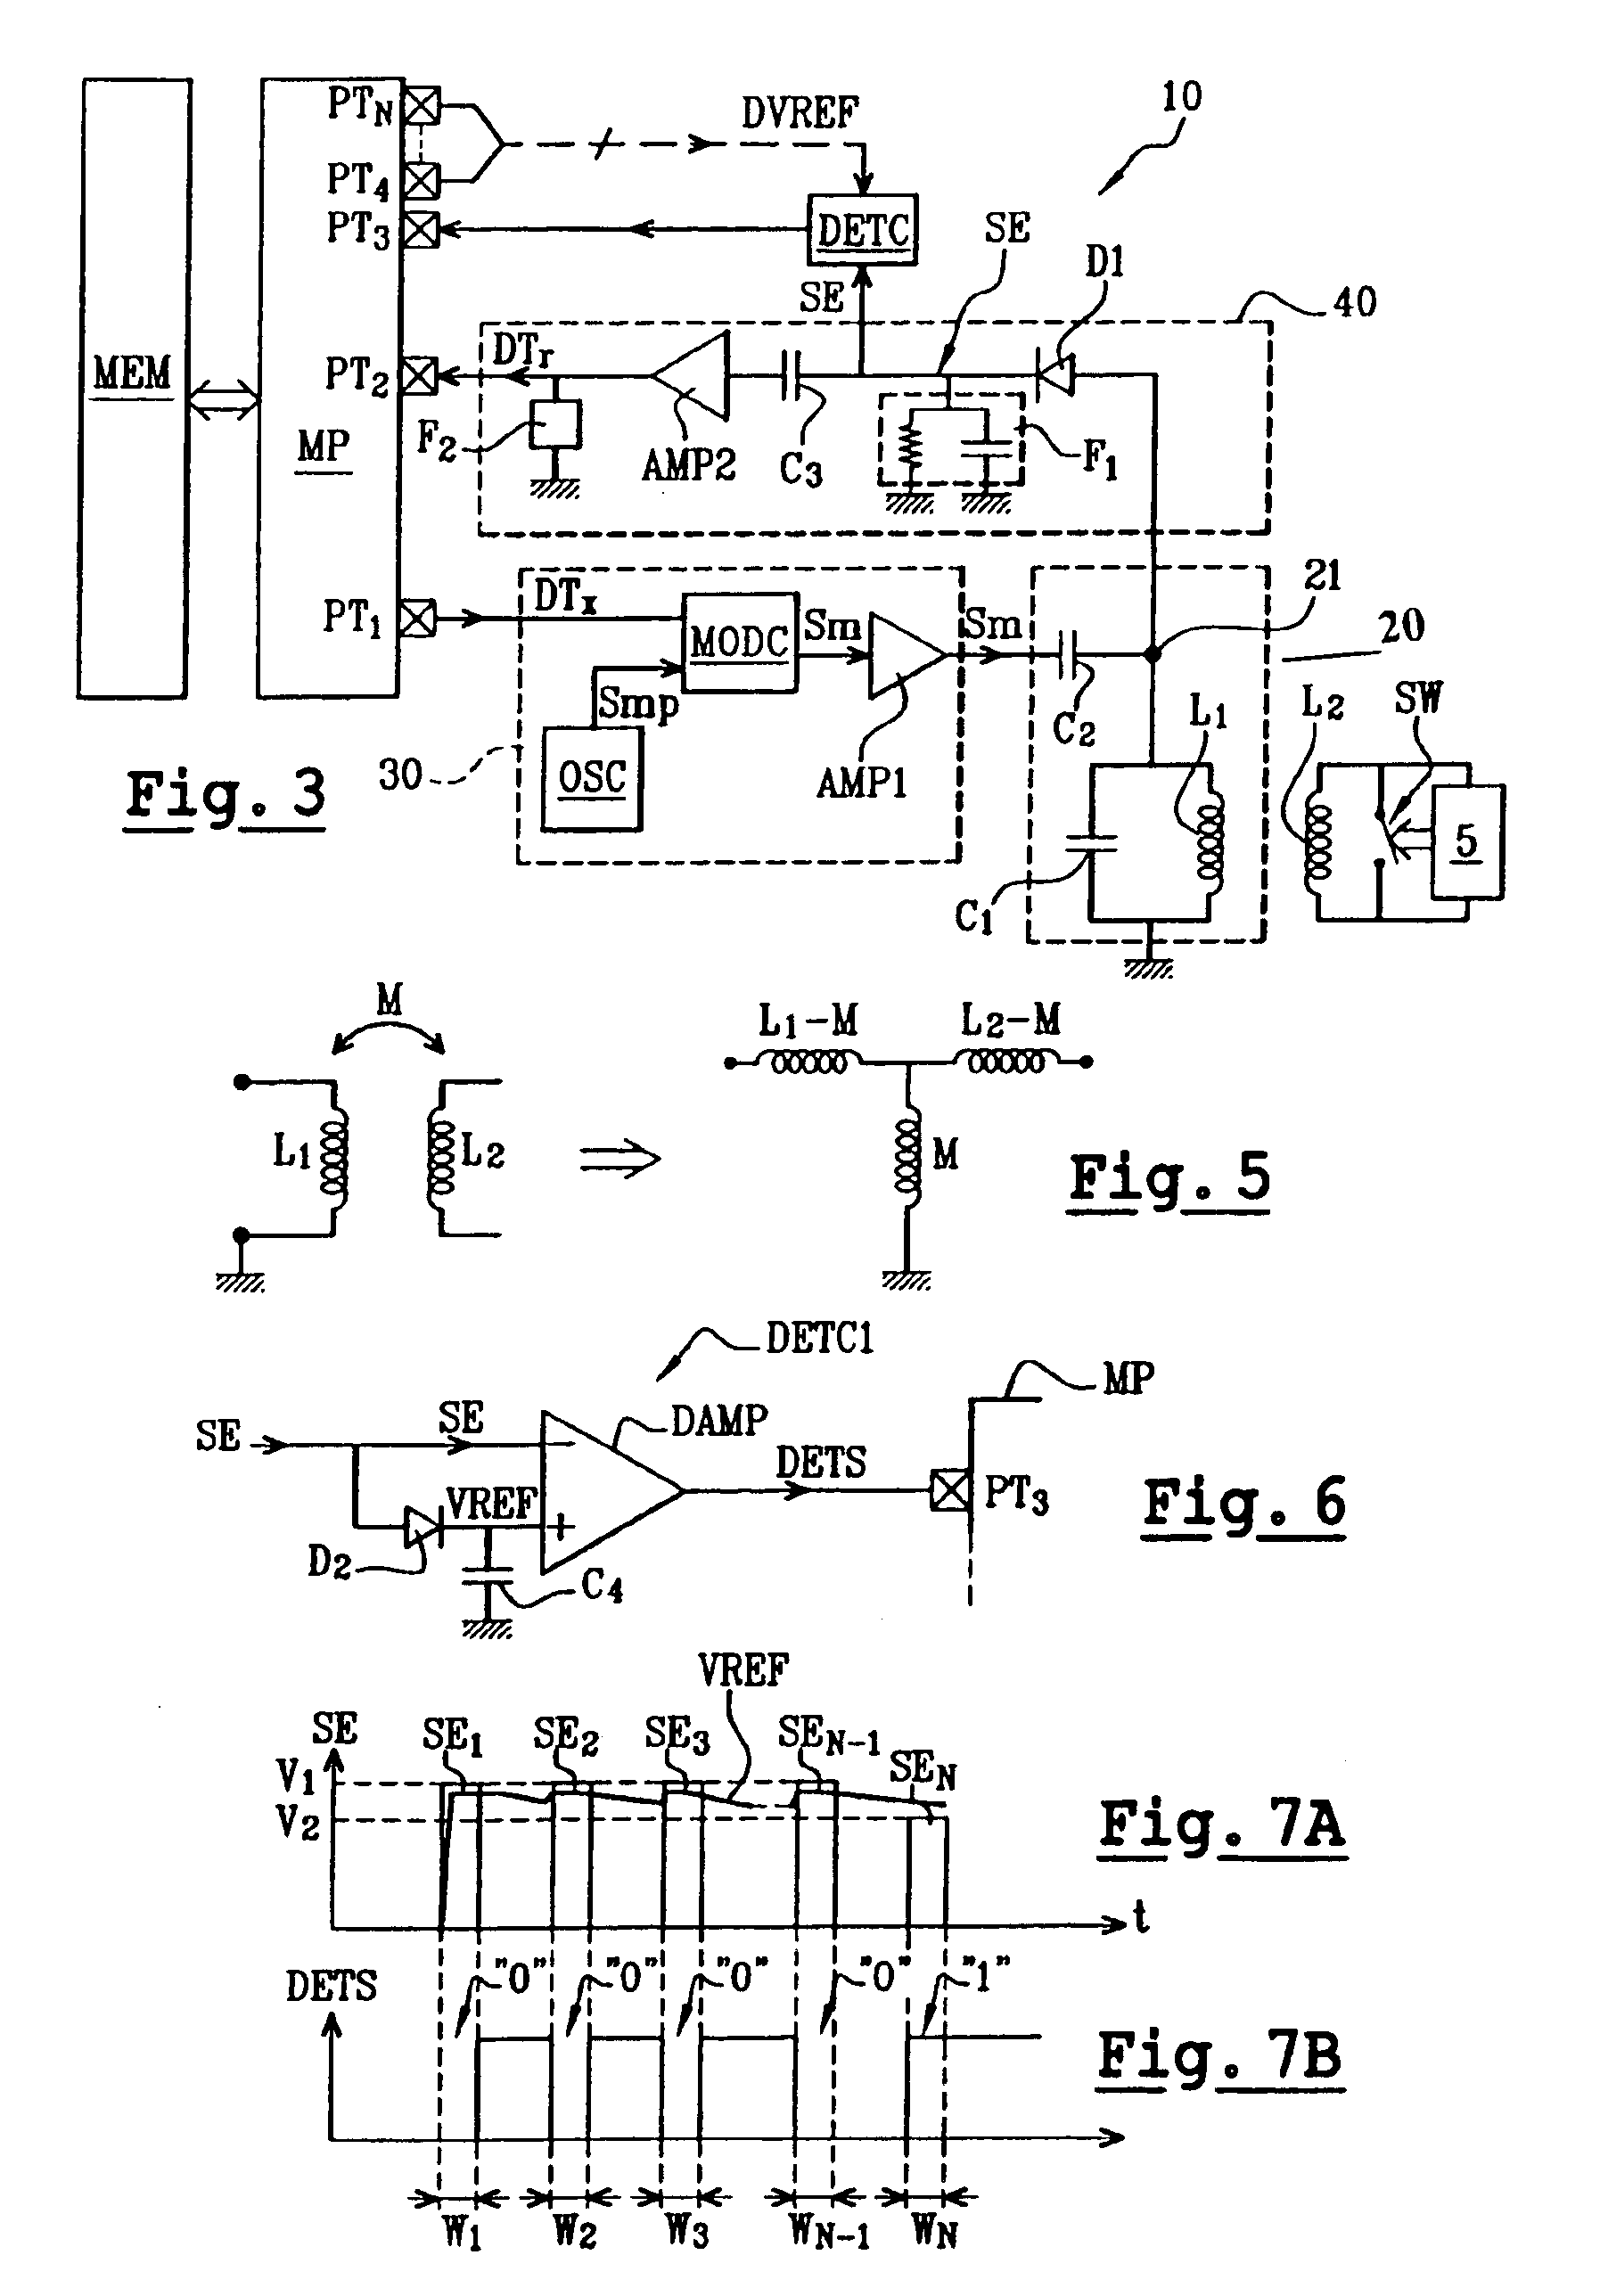 Non-contact integrated circuit reader comprising a low power consumption active standby mode